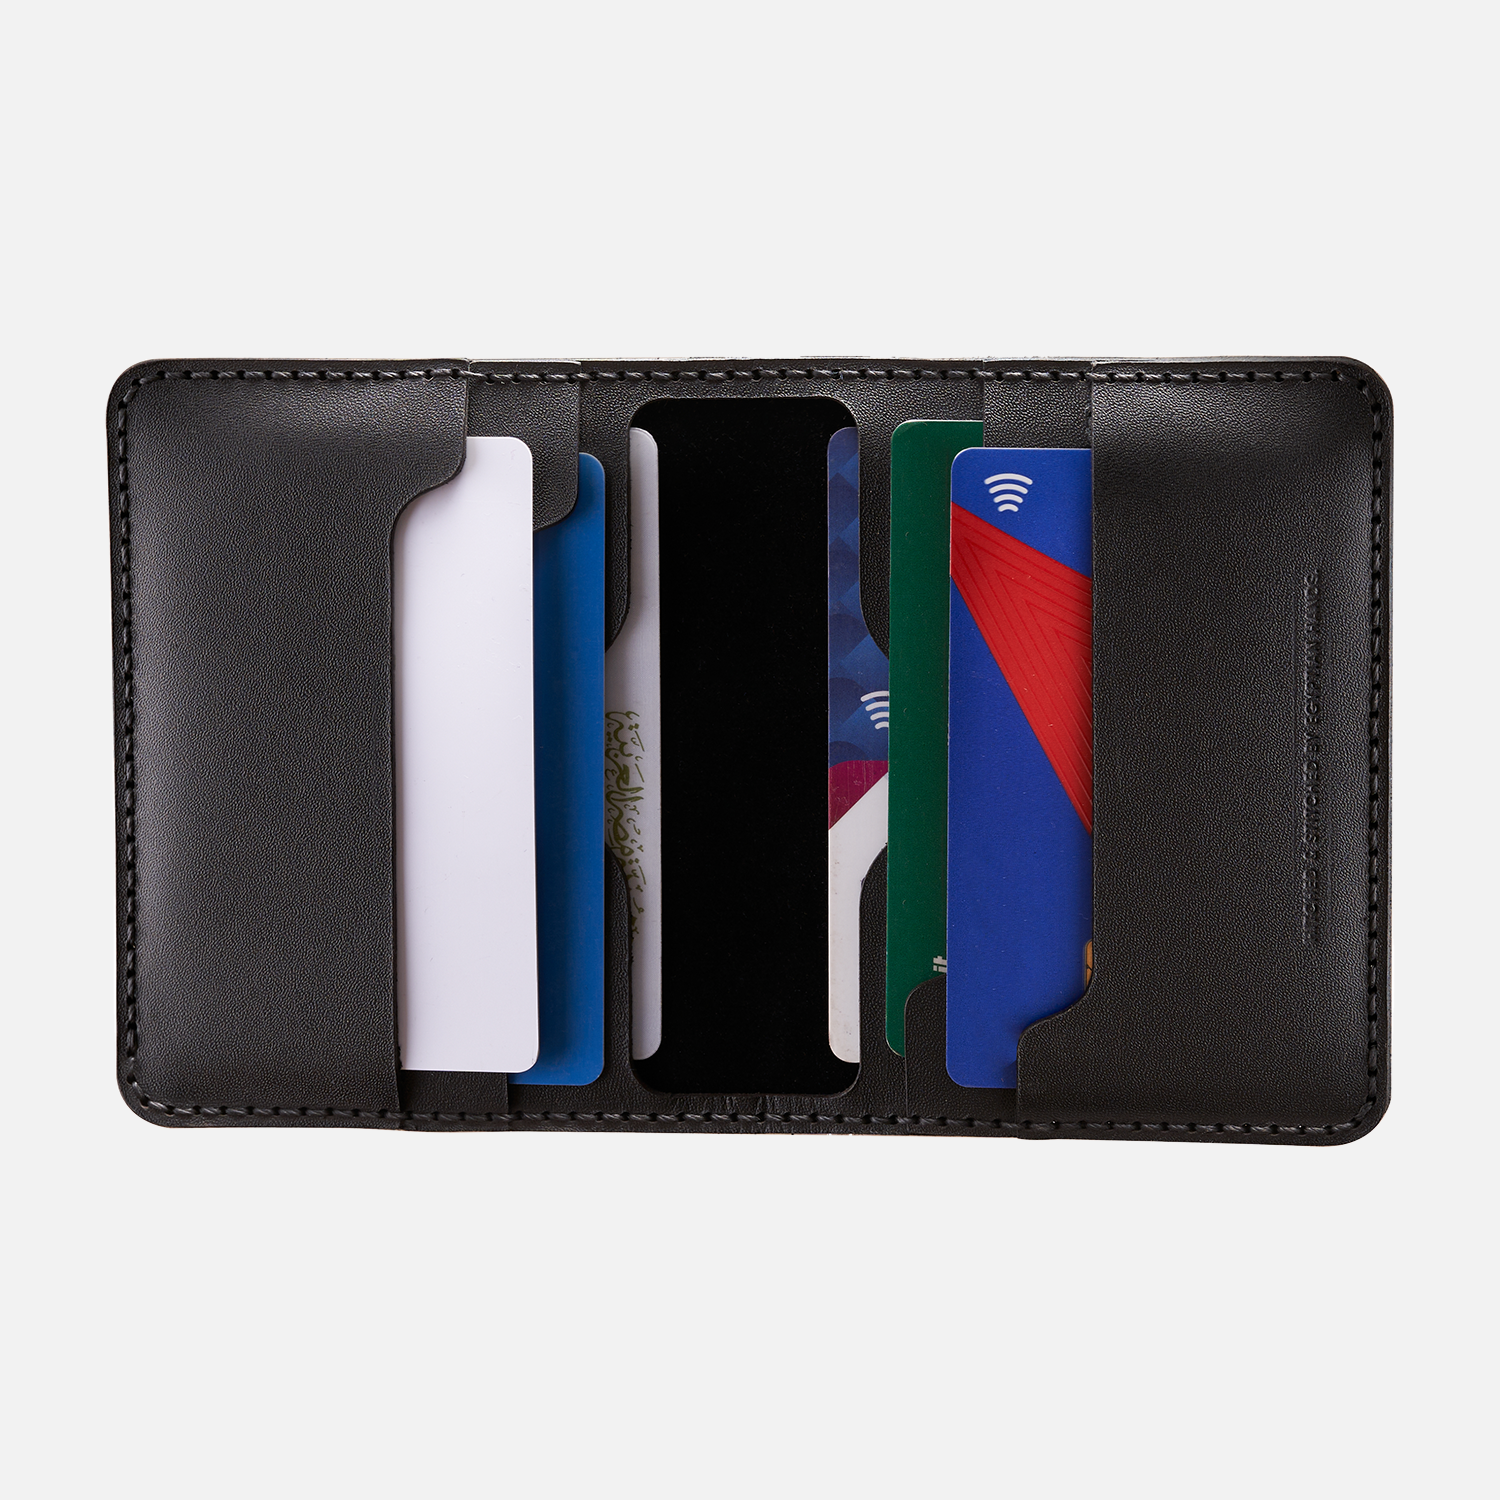 Black leather bifold wallet with multiple cards inside on white background.